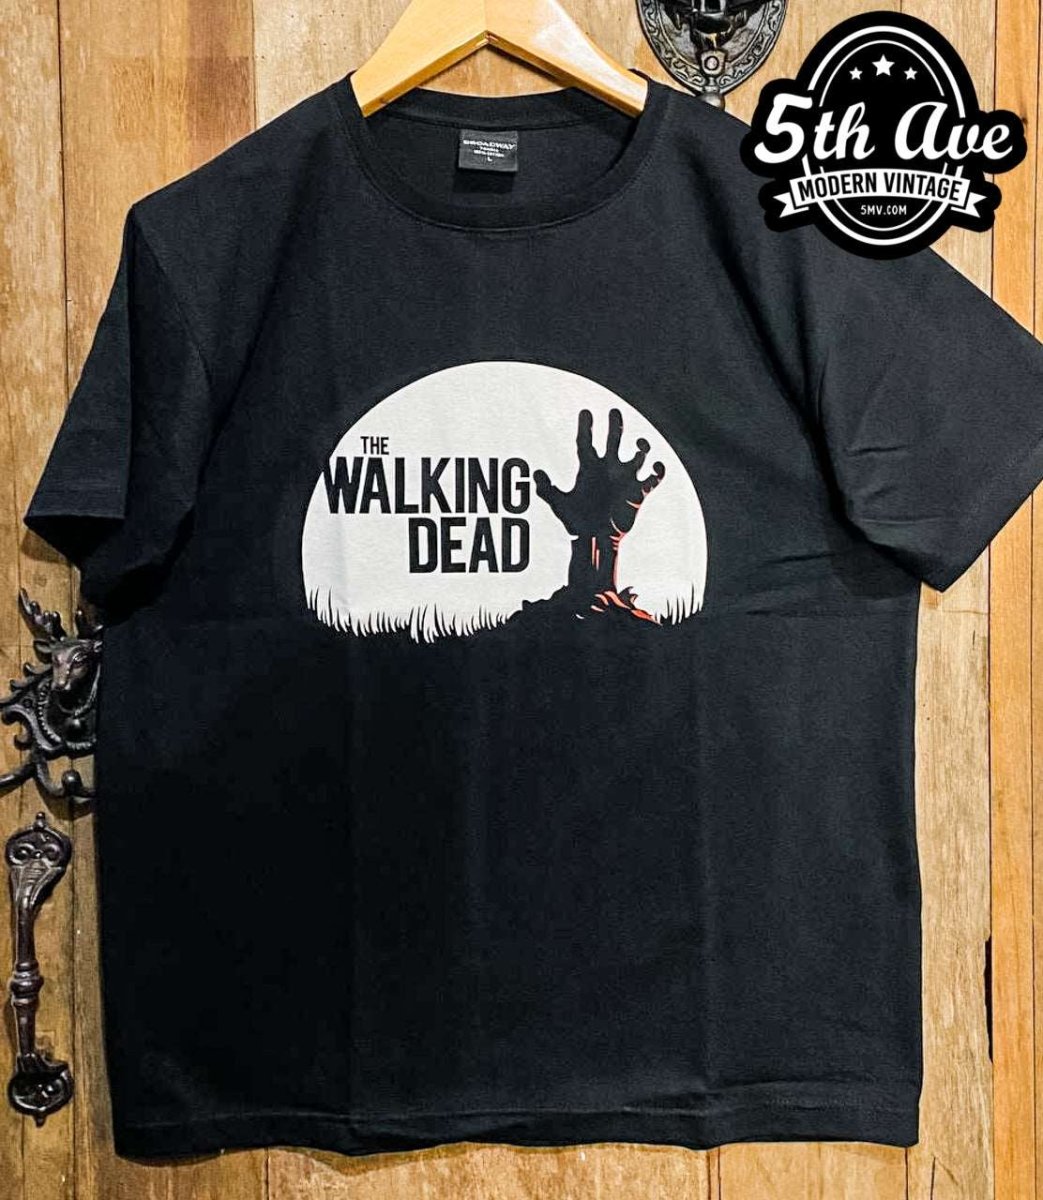 The Walking Dead - New Vintage Movie T shirt - Vintage Band Shirts